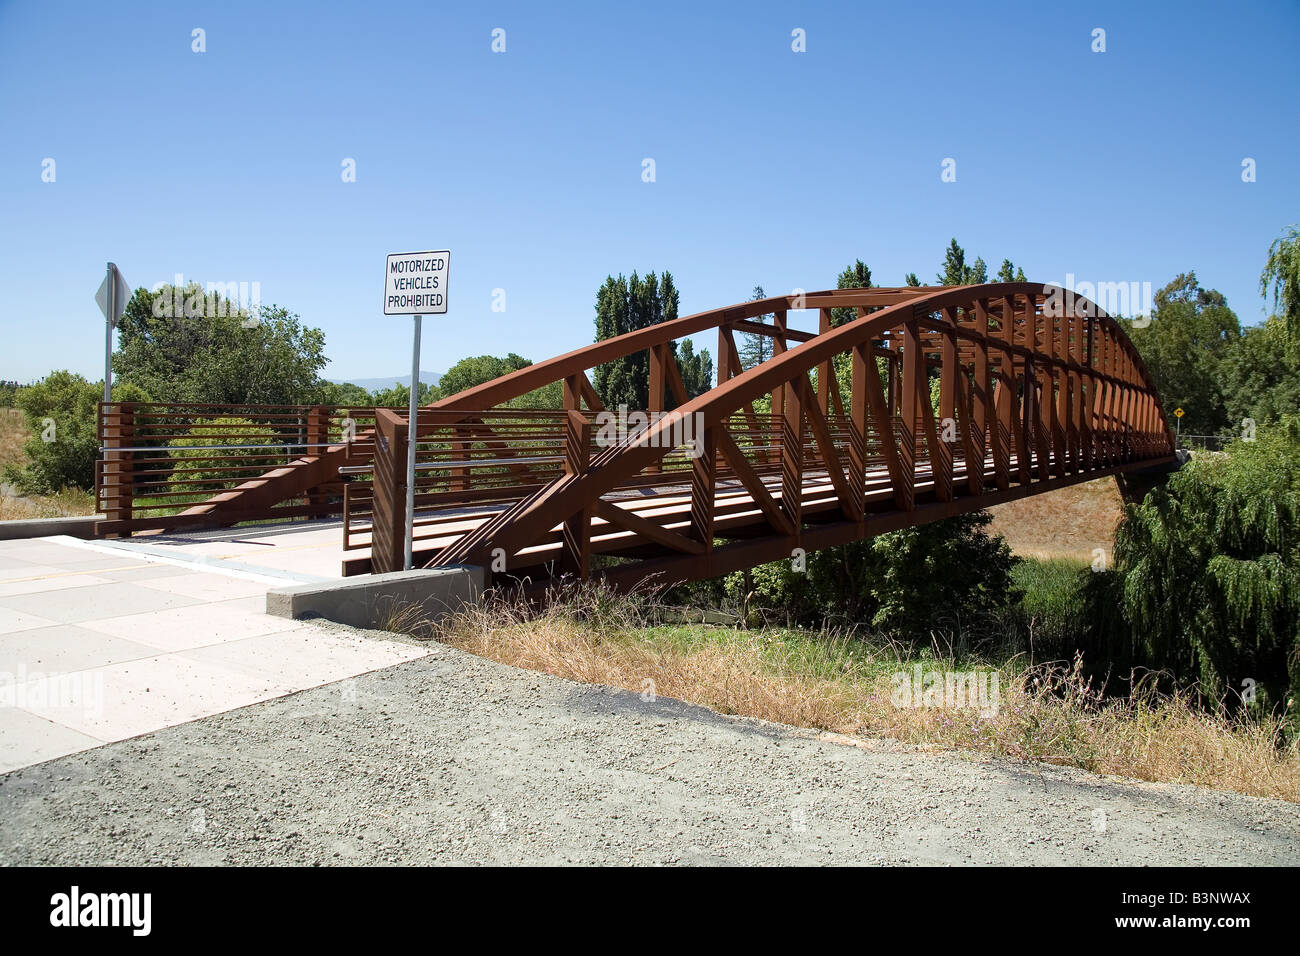 A steel foot bridge allows passage over a creek on a public walking path. Stock Photo